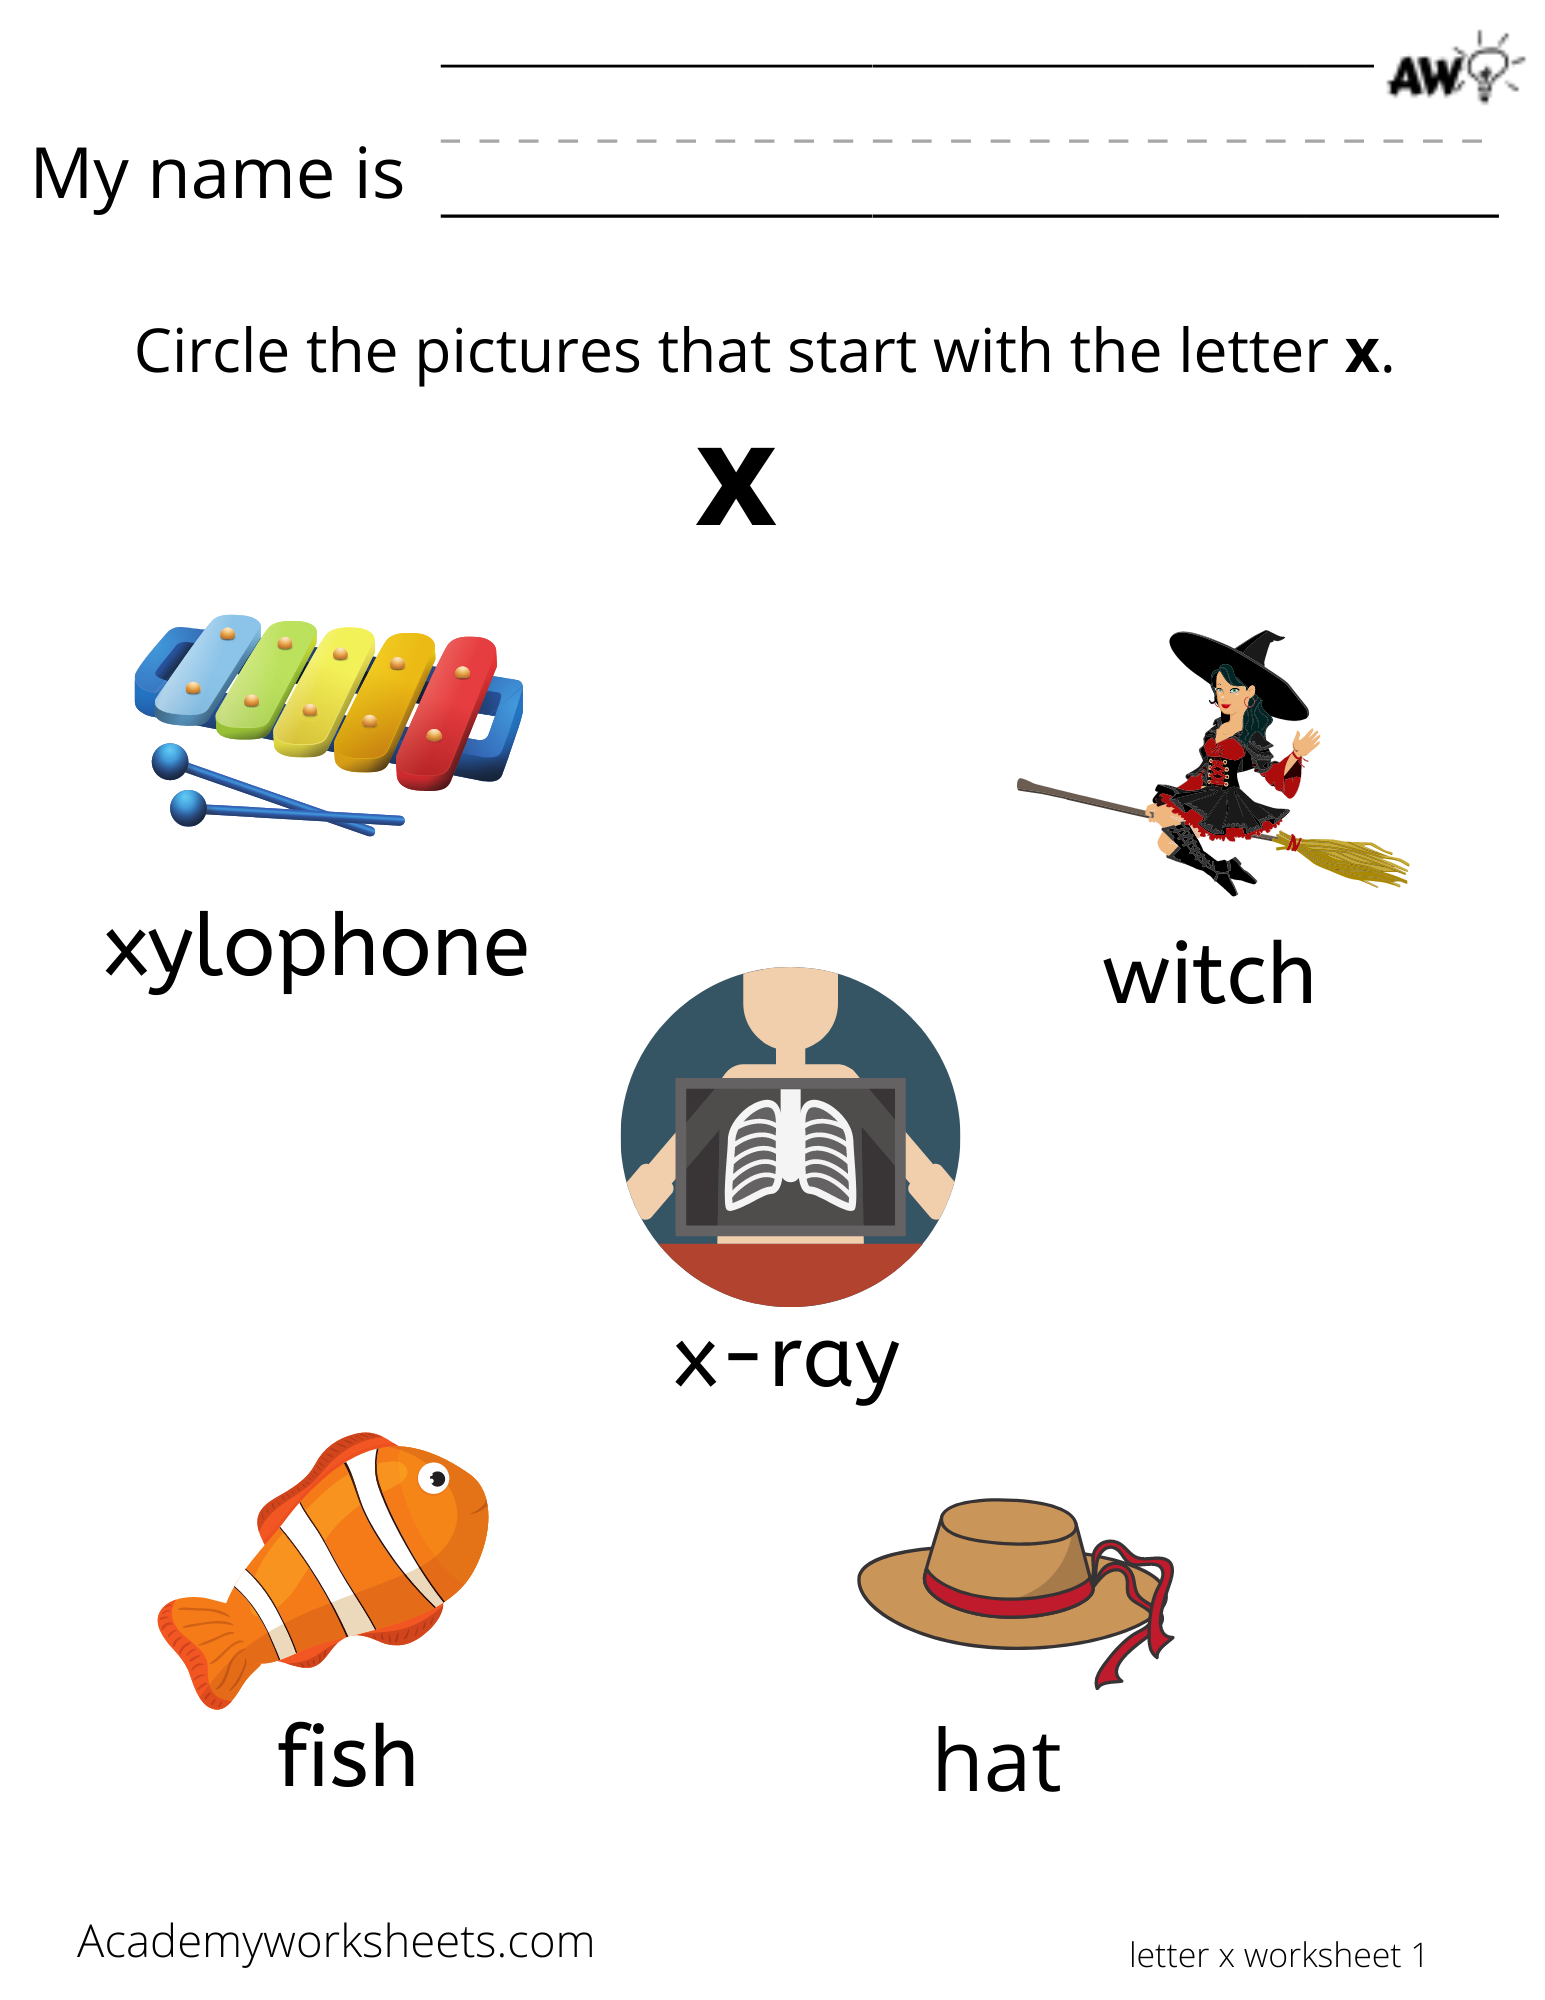 learn-the-letter-x-x-academy-worksheets